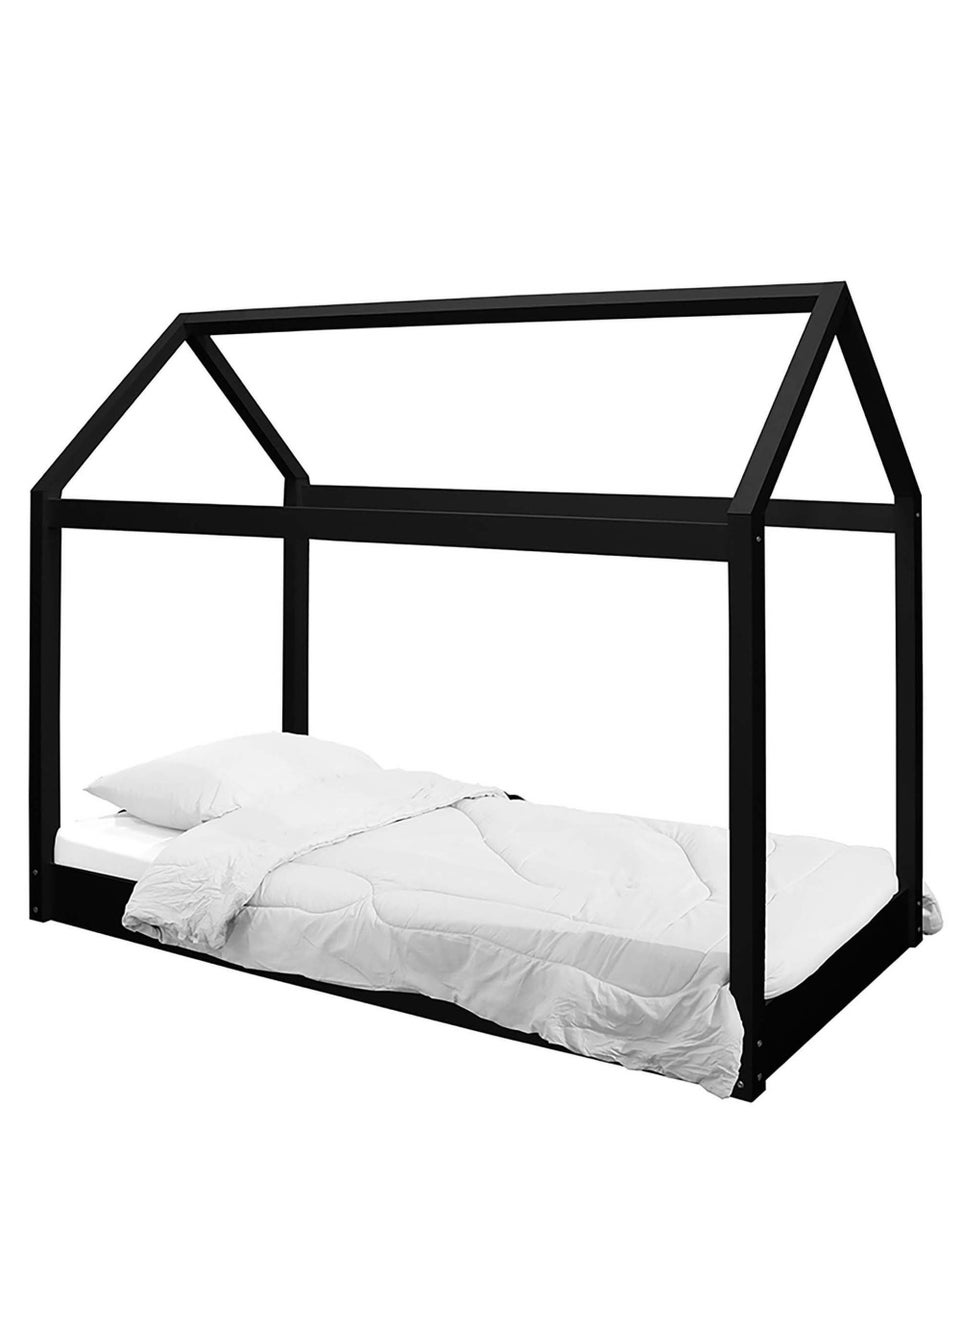 LPD Furniture Hickory 3 Single Bed Black